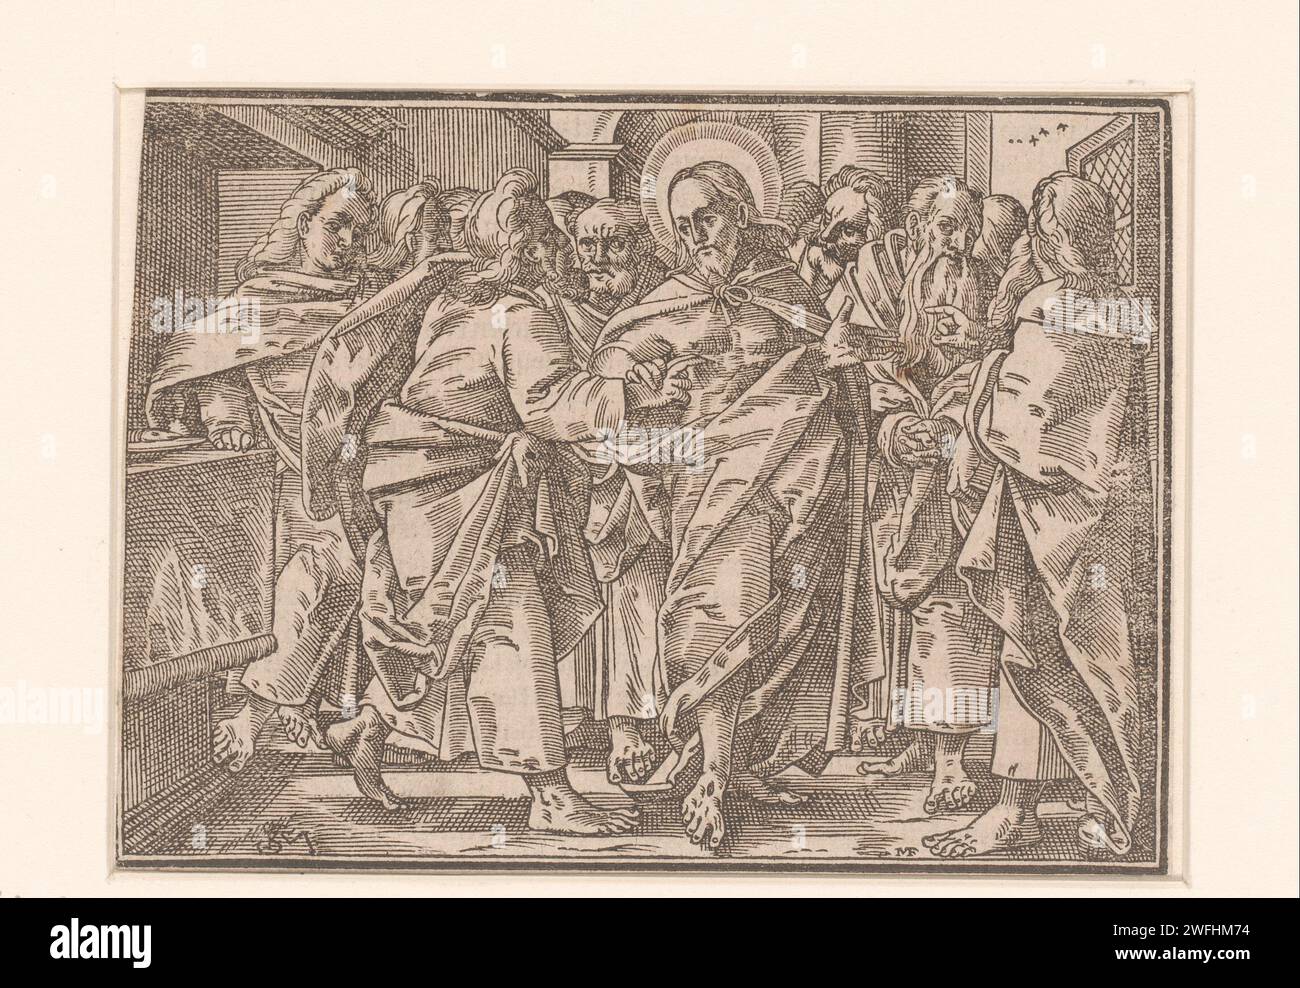 Unbelieving Thomas, Lucas Mayer, Christoph Murer, 1625 print   paper  the incredulity of Thomas Stock Photo